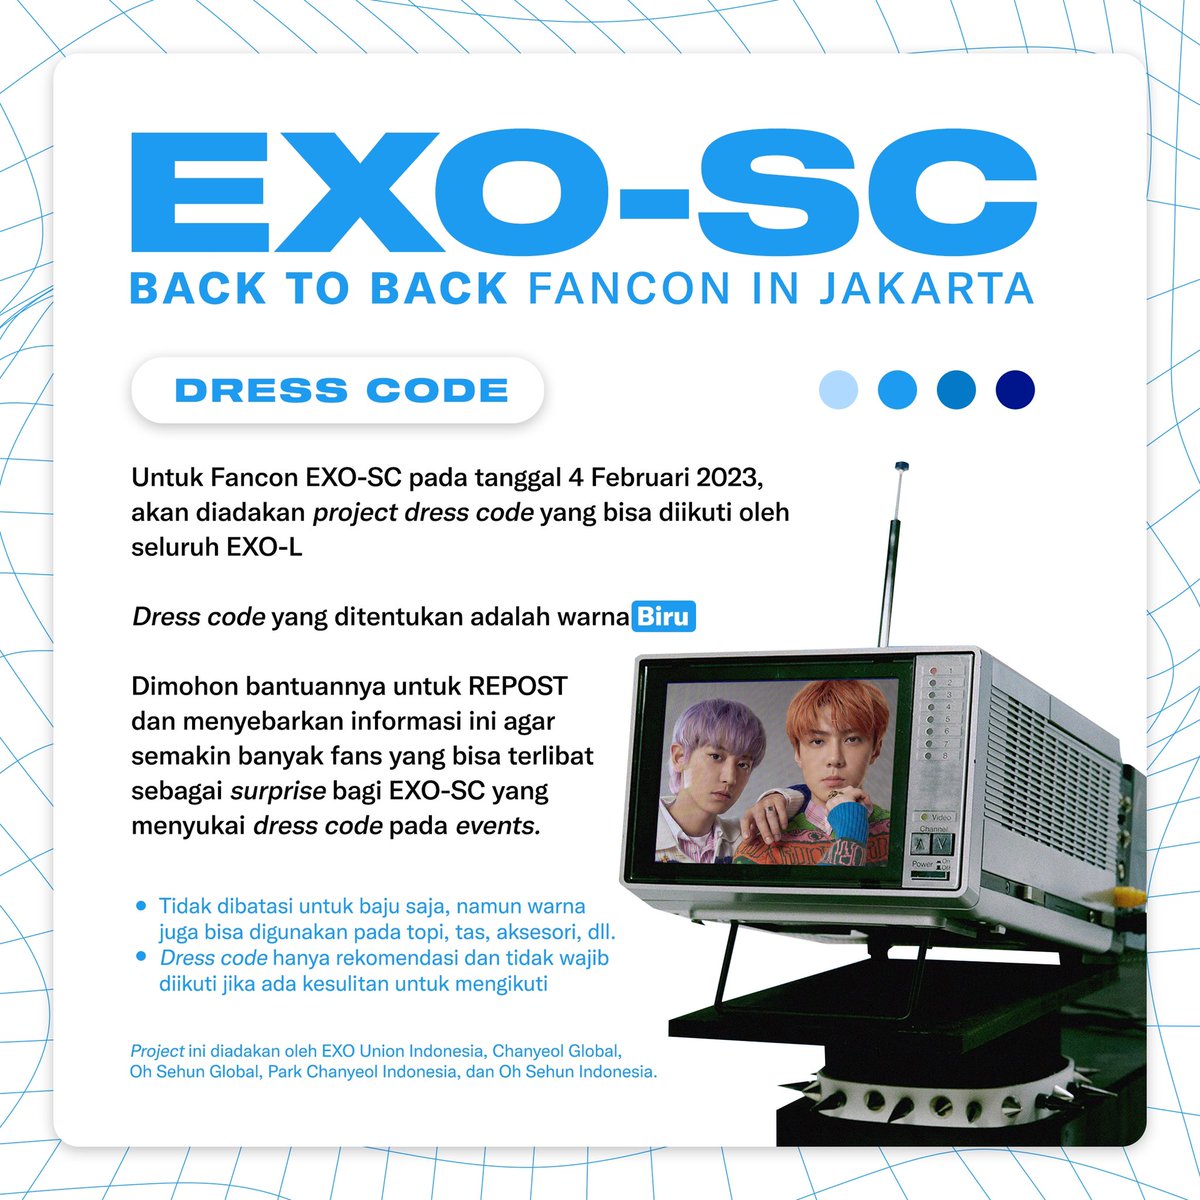 #EXOSC_BackToBack Jakarta Fancon Dress Code Event Guide

Presenting the Jakarta Fancon of #EXO_SC (held on 4 Feb) with a dress-code event that will make it even more special! 💙

Project by
EXOUNIONINA @EXOSCUNION
@ChanyeolGlobal @OhSehunGlobal @xunqi_indonesia @parkchanyeolina